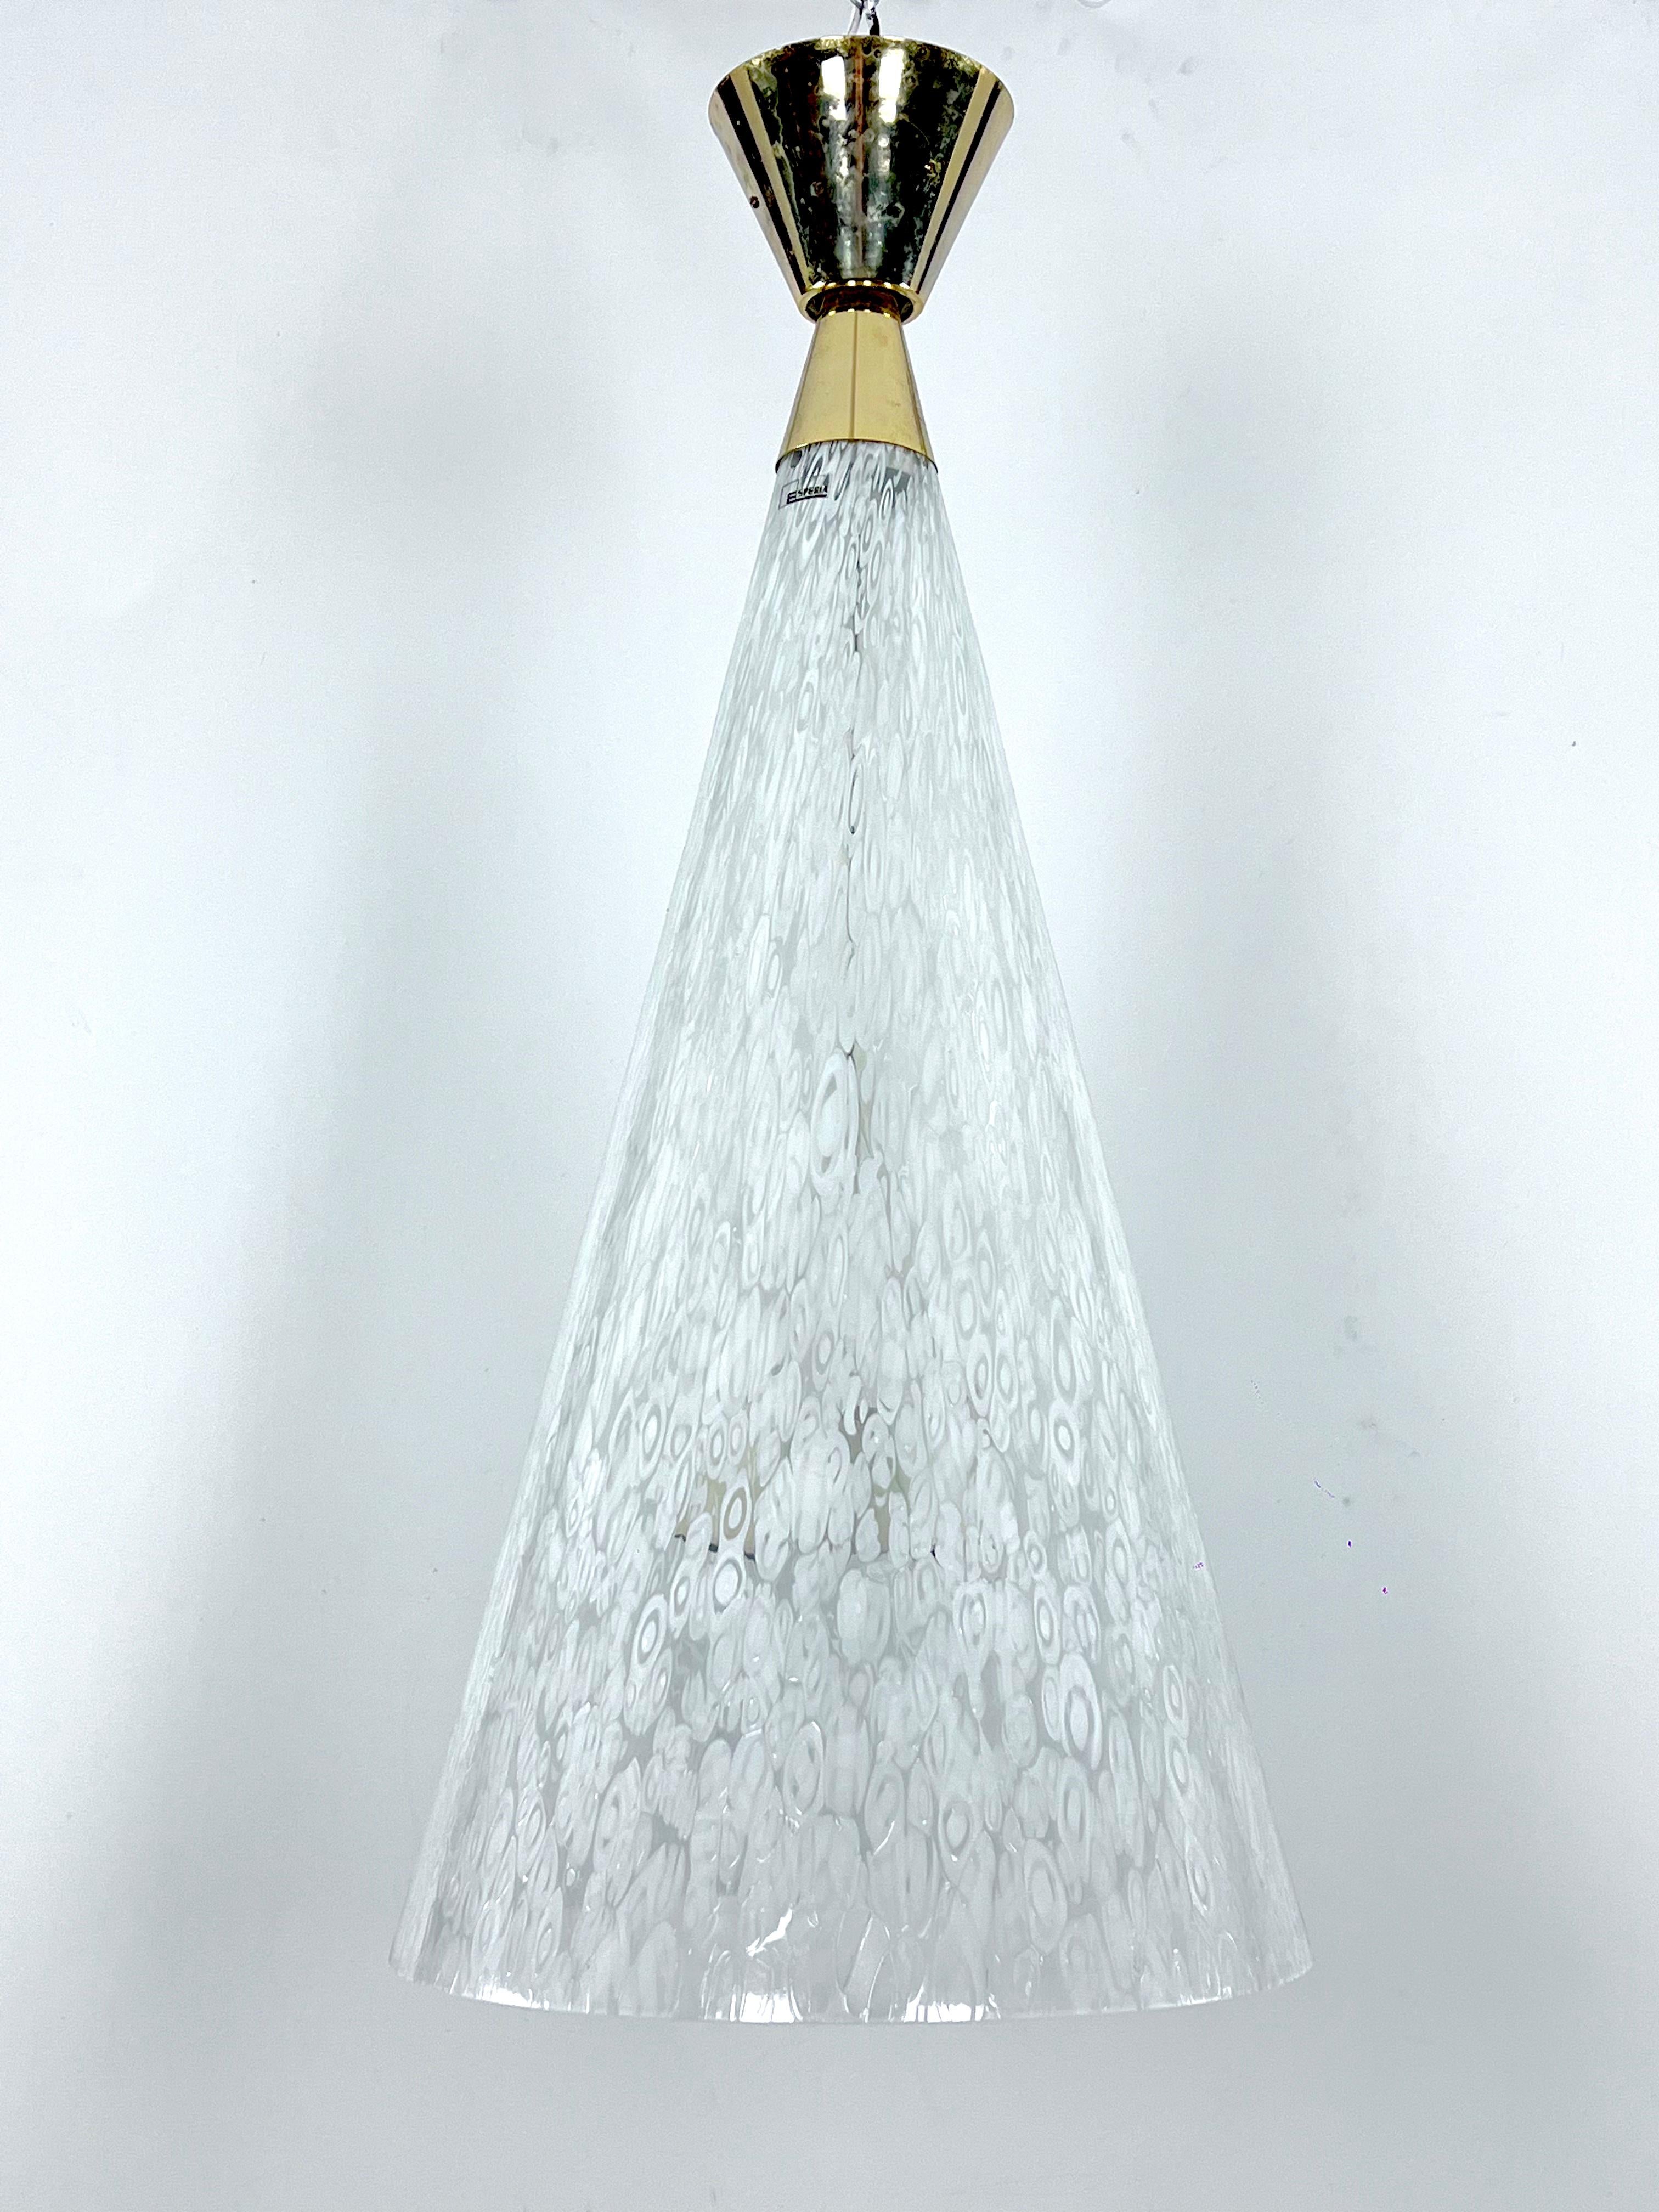 Very rare Murano glass and brass chandelier designed by Angelo Brotto for Esperia and produced in Italy during the late 1970s. Great vintage condition with normal trace of age and use. Thick glass with no chips or cracks. It mounts three sockets for